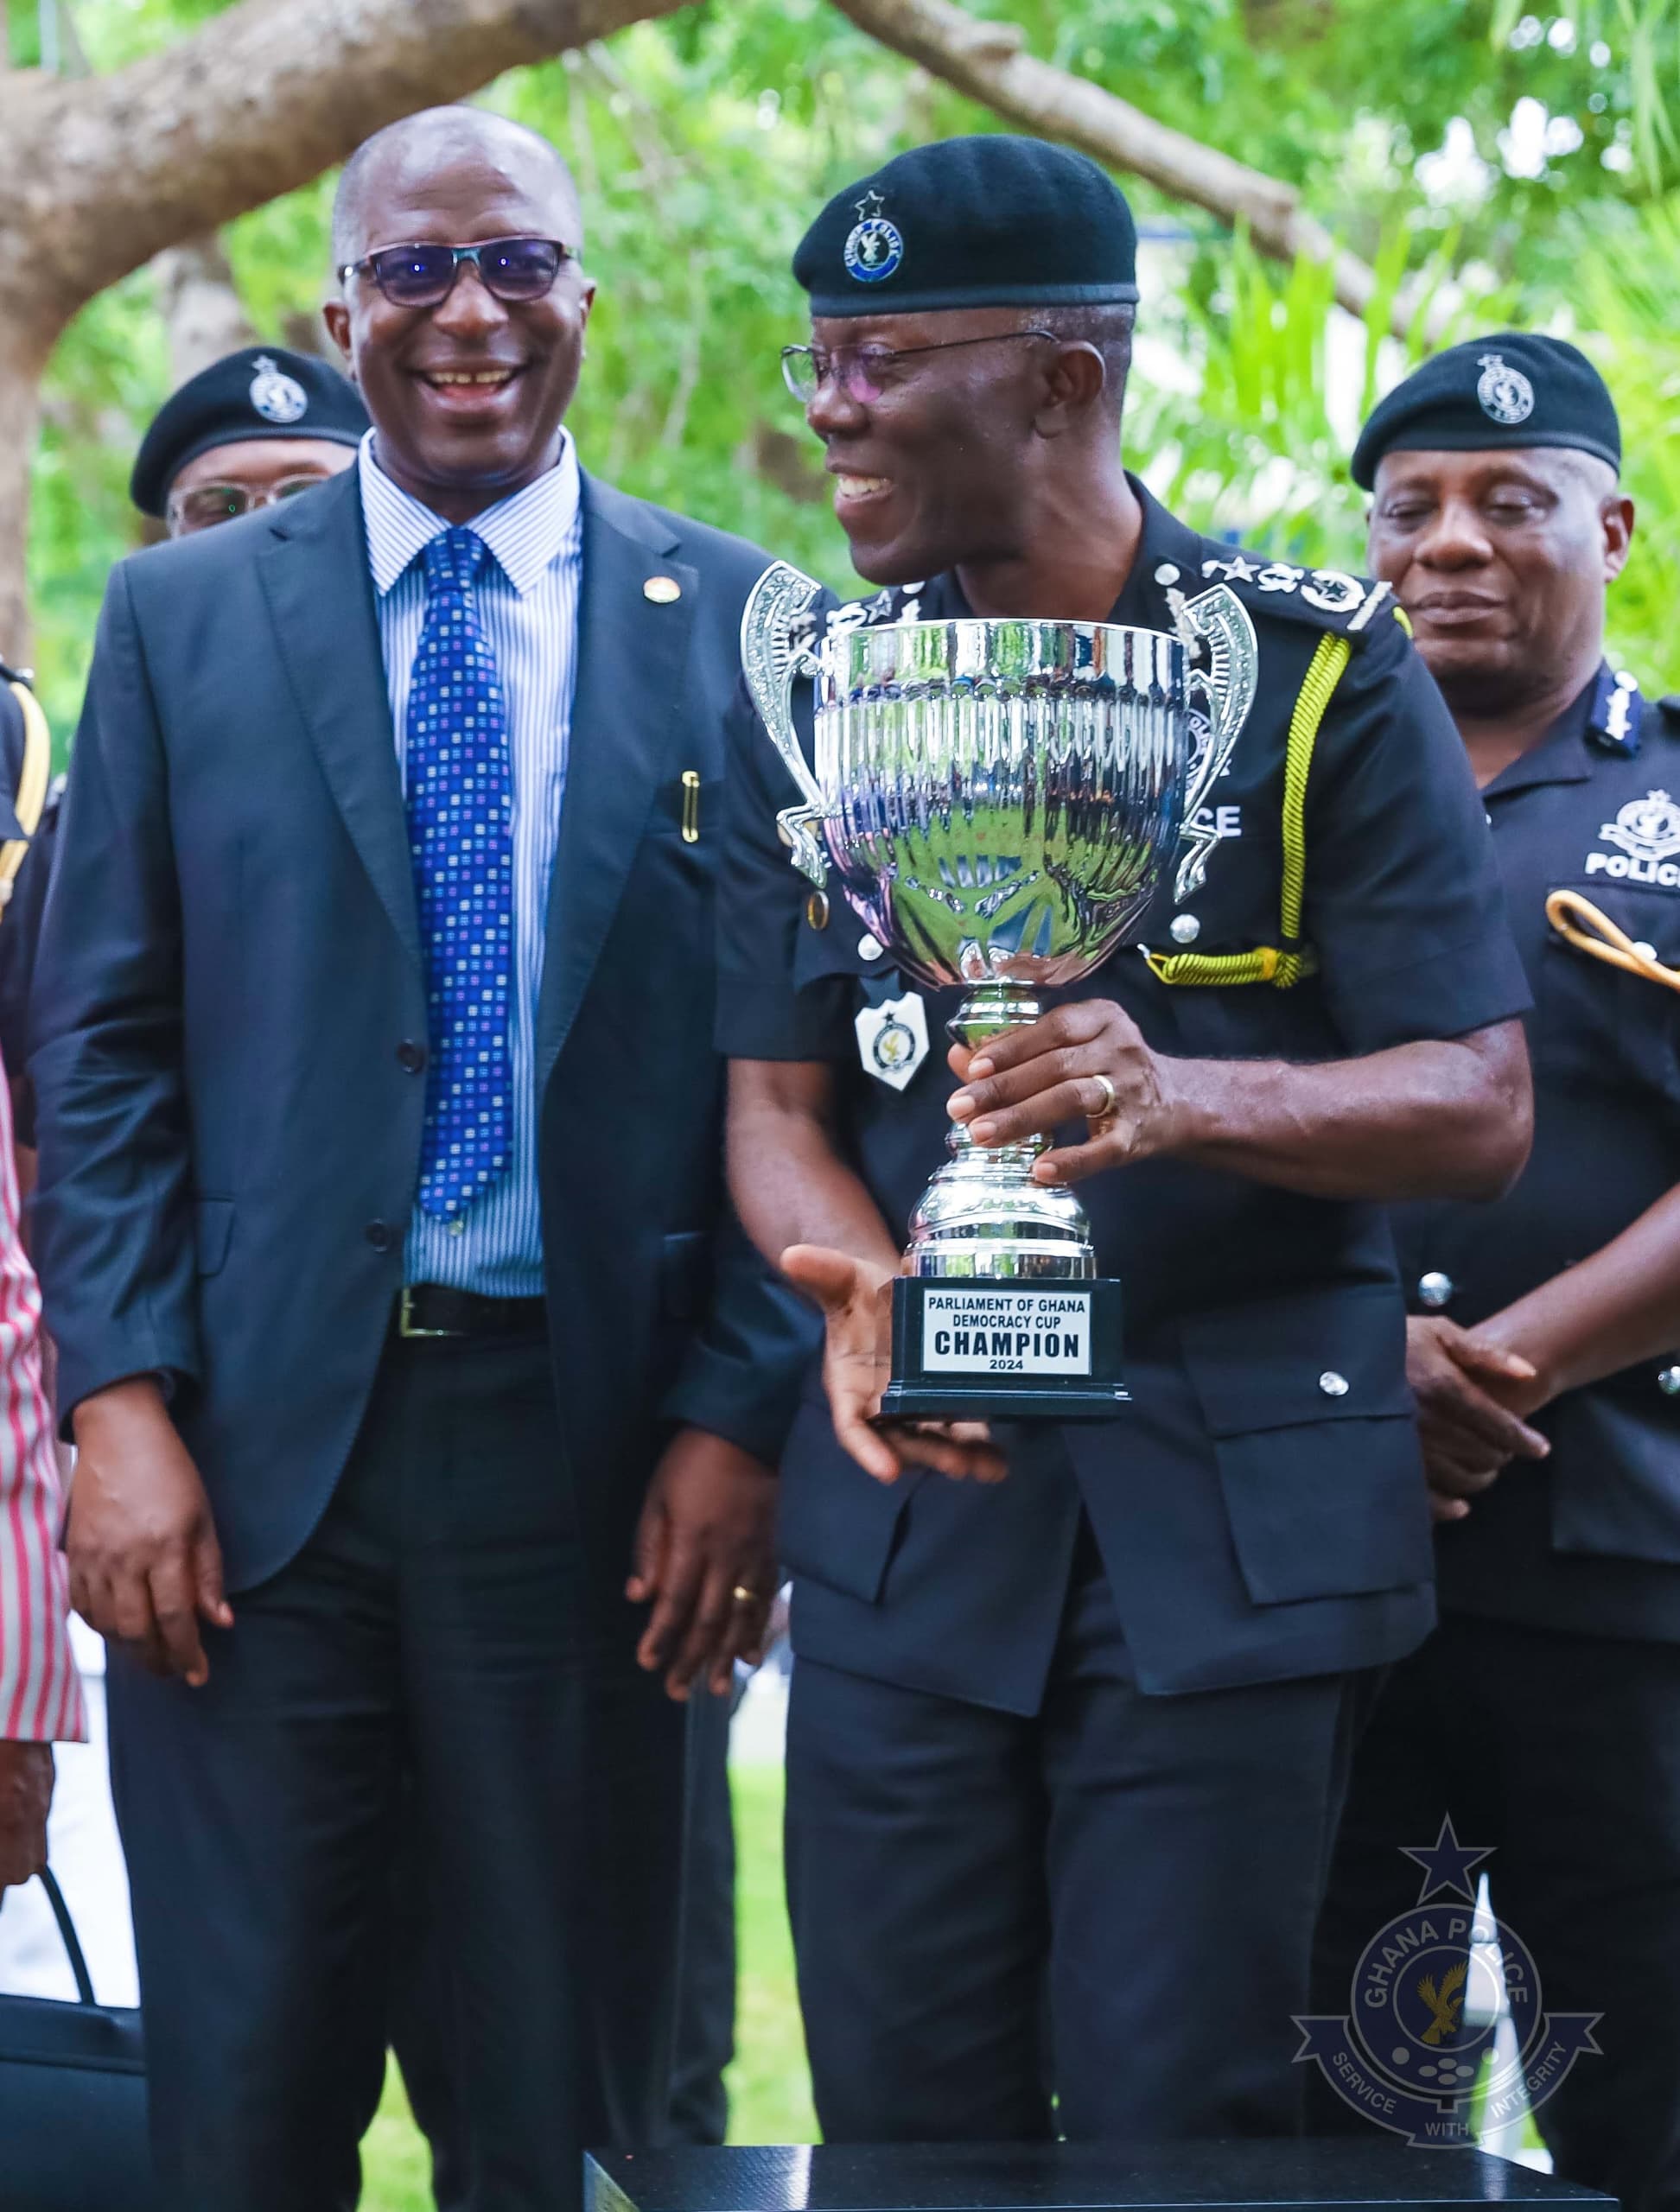 ‘Your leadership has been inspirational’ – 2nd Deputy Speaker to IGP